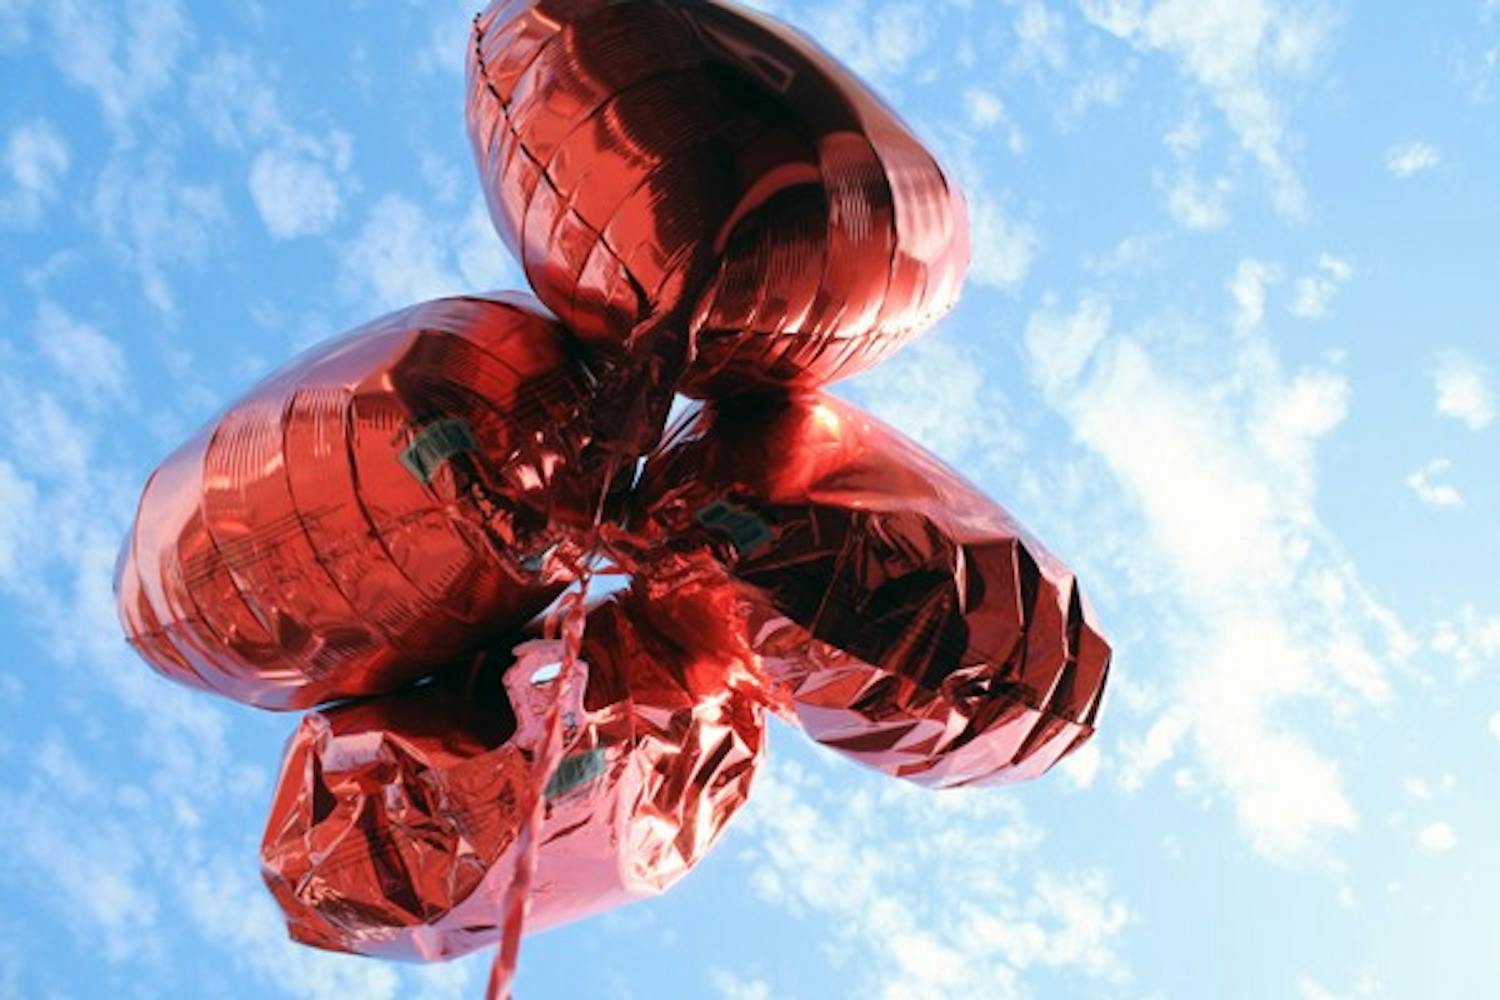 A bouquet of red heart balloons float under the sky near Sparky's Old Town Creamery on Mill Avenue Monday afternoon. (Photo by Jessie Wardarski)